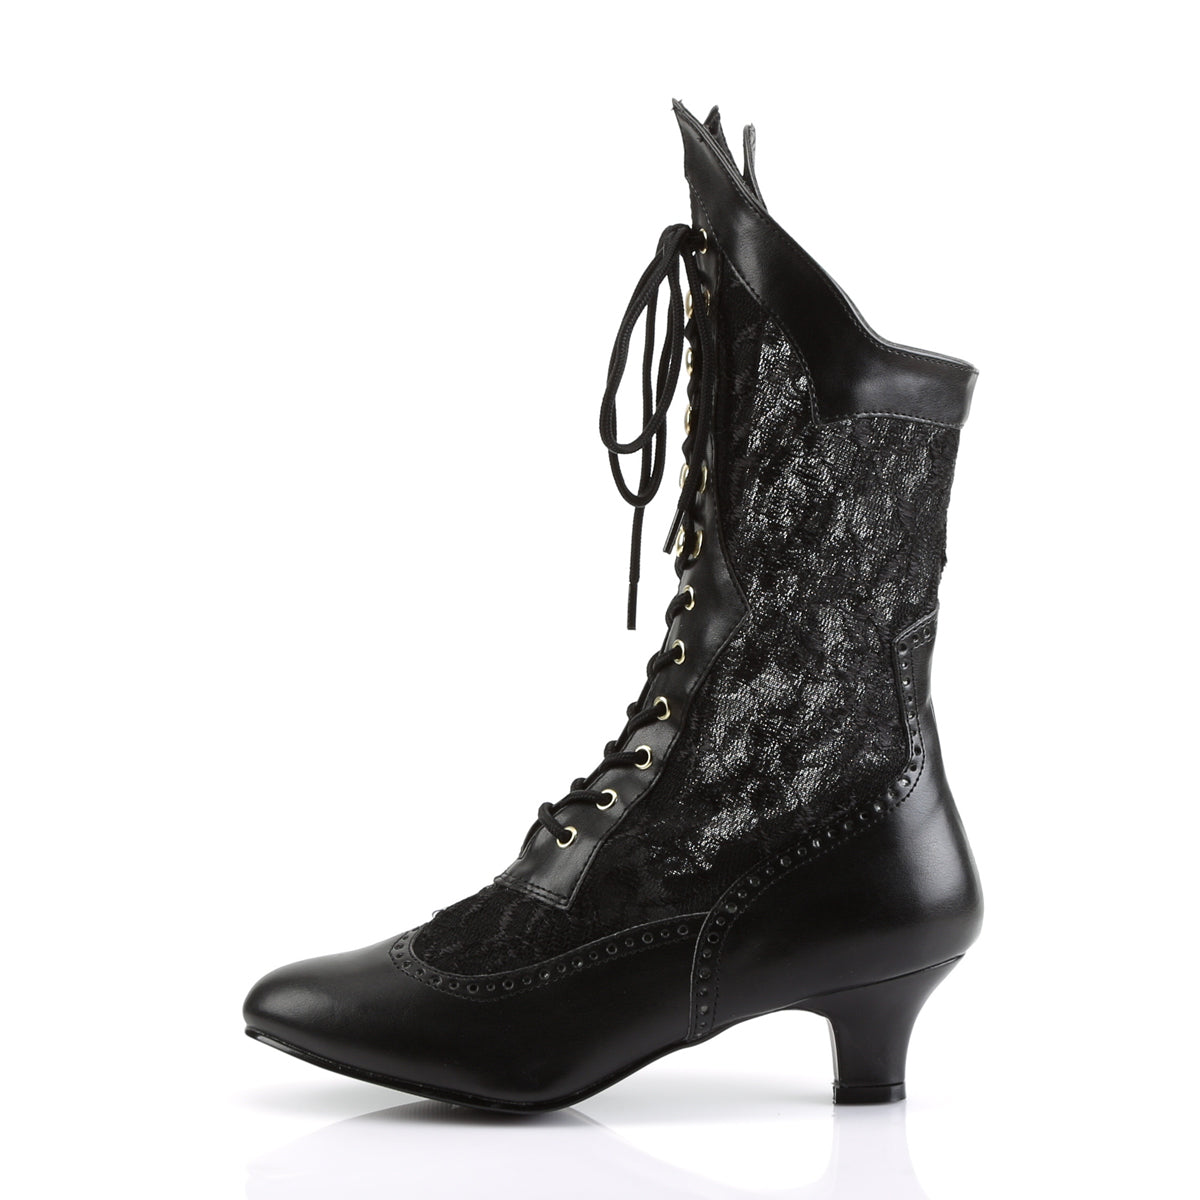 DAME-115 Black Ankle Boots Black Multi view 4